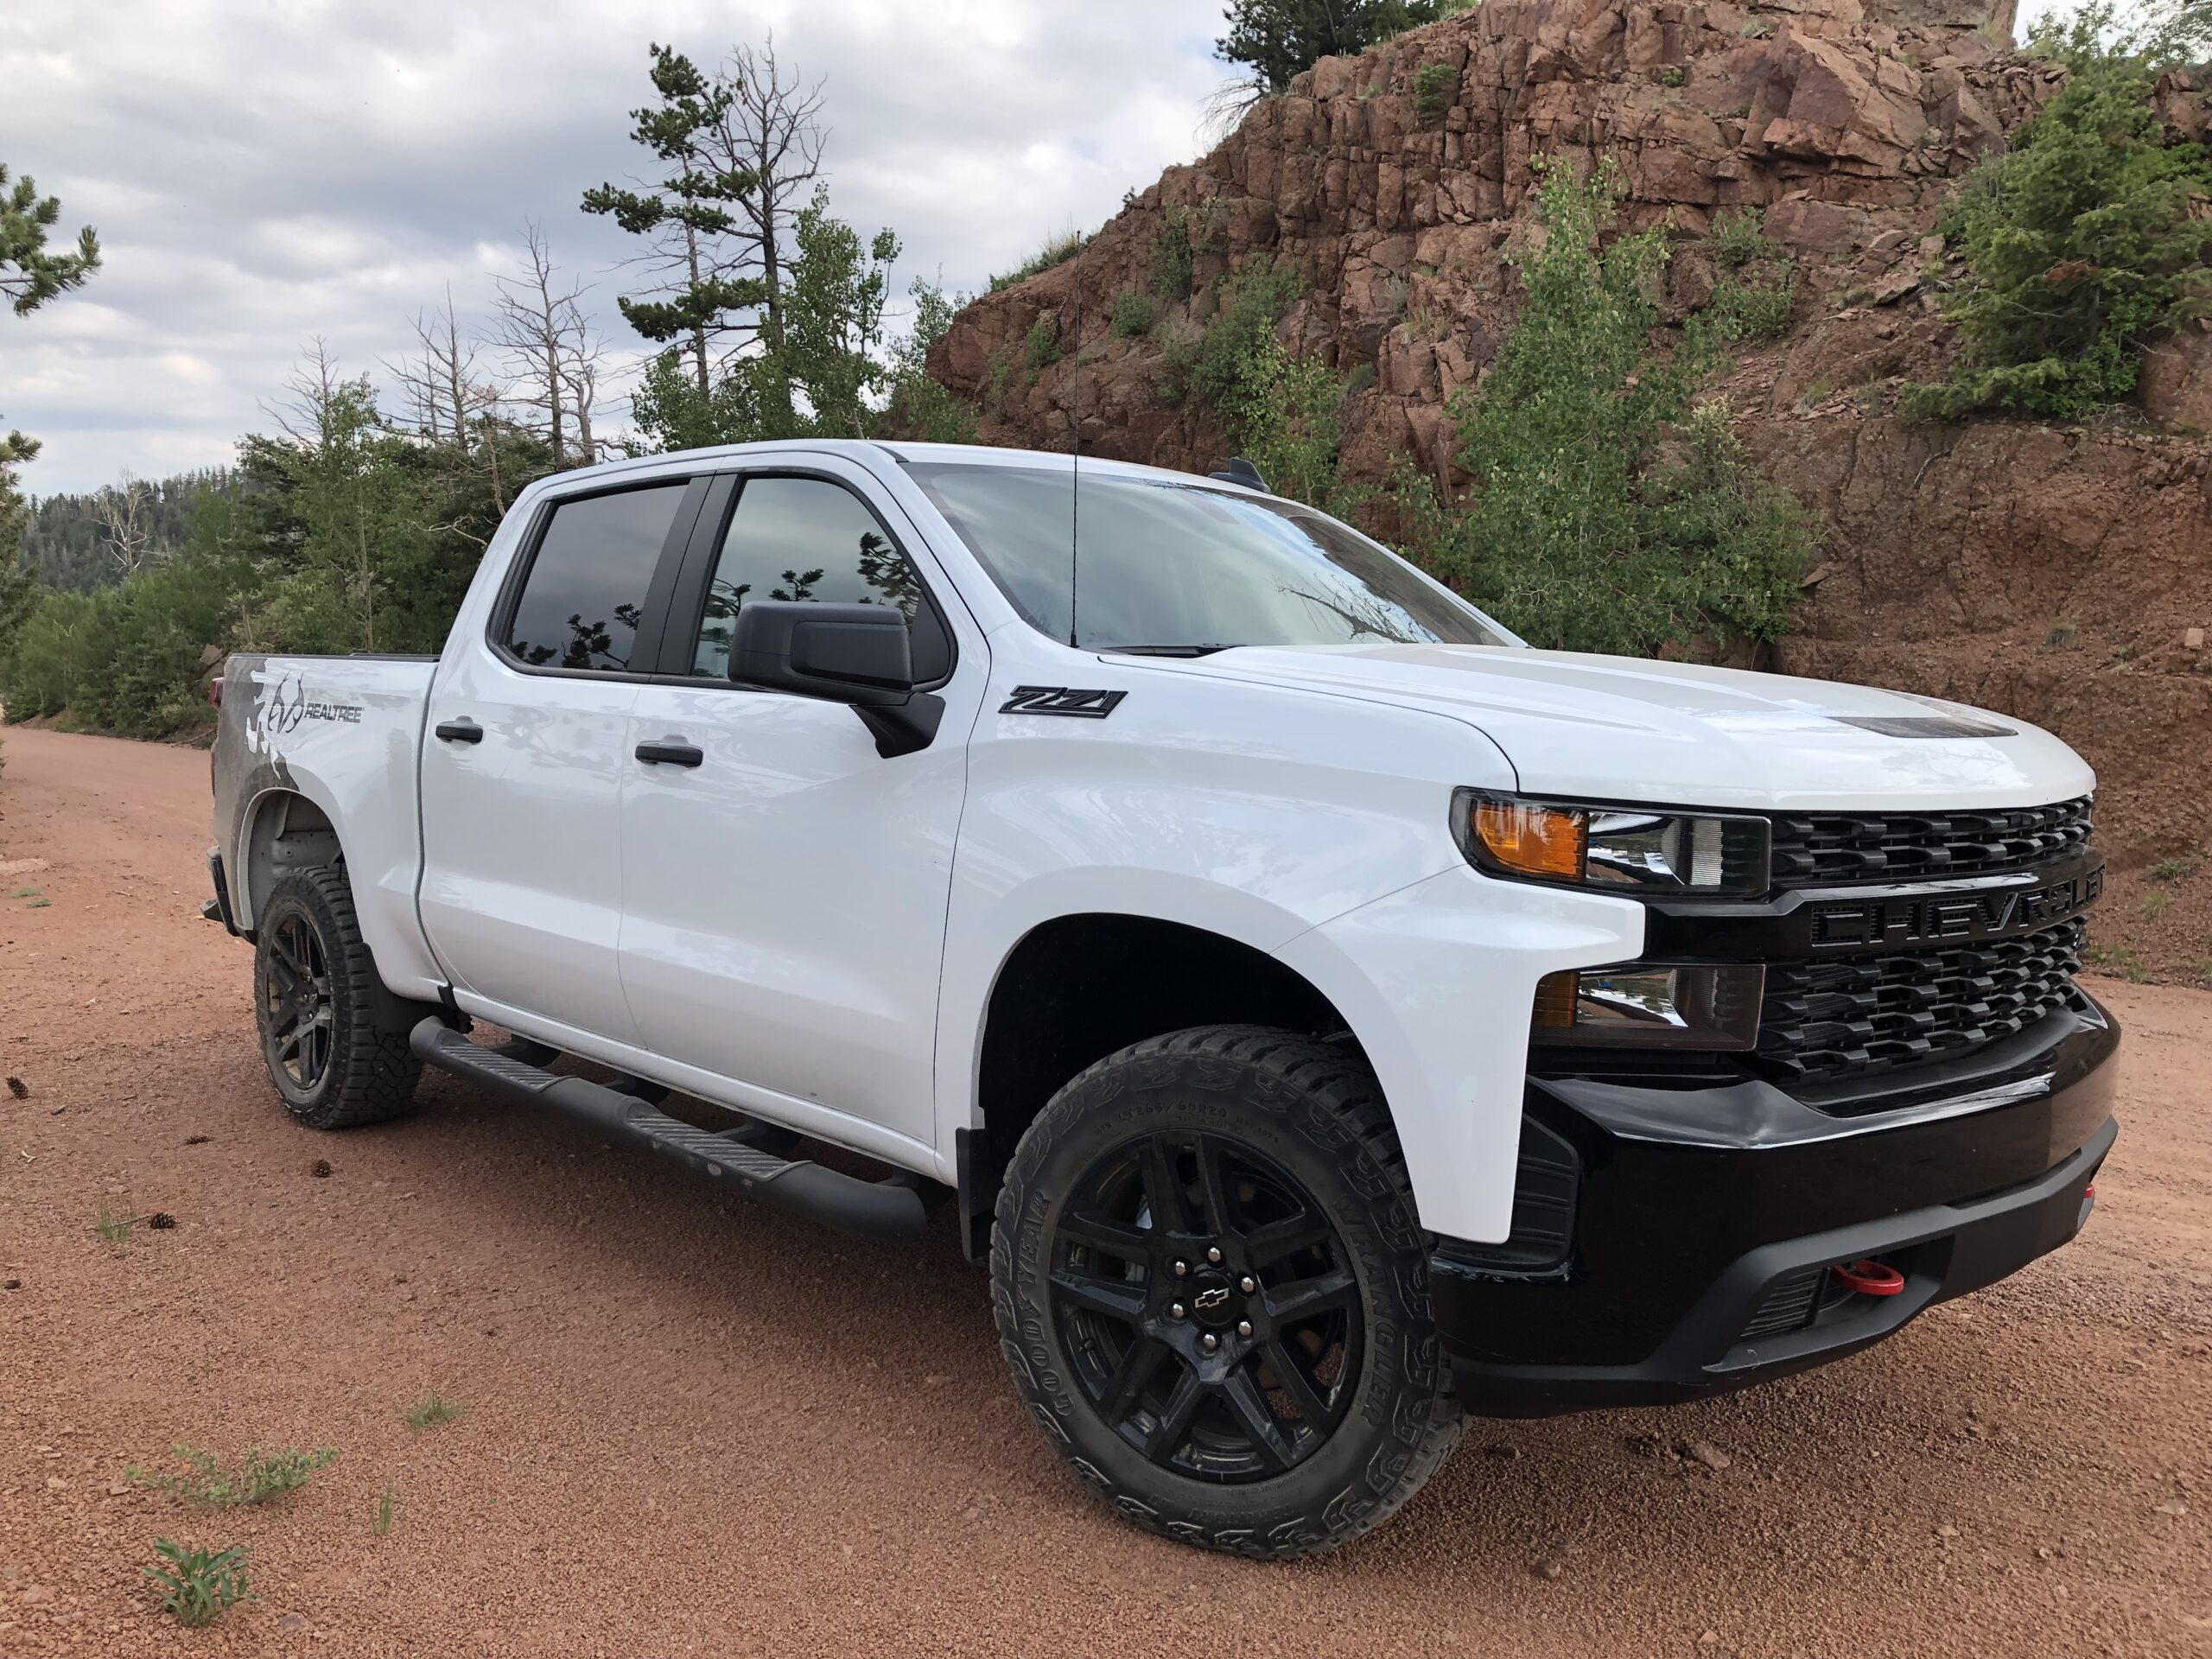 Truck Review: Chevy Silverado Realtree Edition Was Built with Hunters in Mind